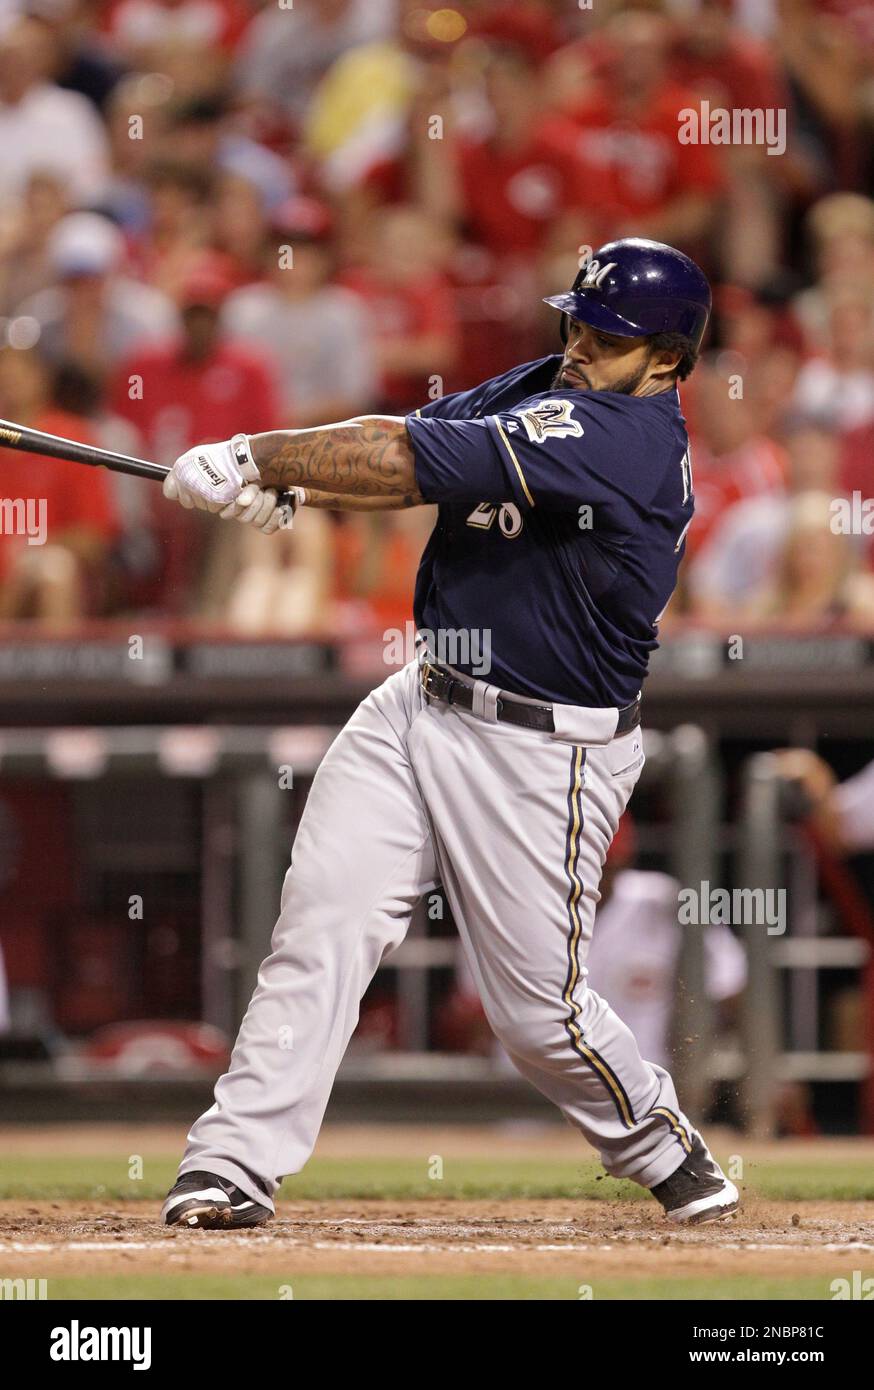 Milwaukee Brewers first baseman Prince Fielder (28) hits a high pop foul  during the game between the Milwaukee Brewers and San Francisco Giants at  Miller Park in Milwaukee, Wisconsin. The Giants defeated